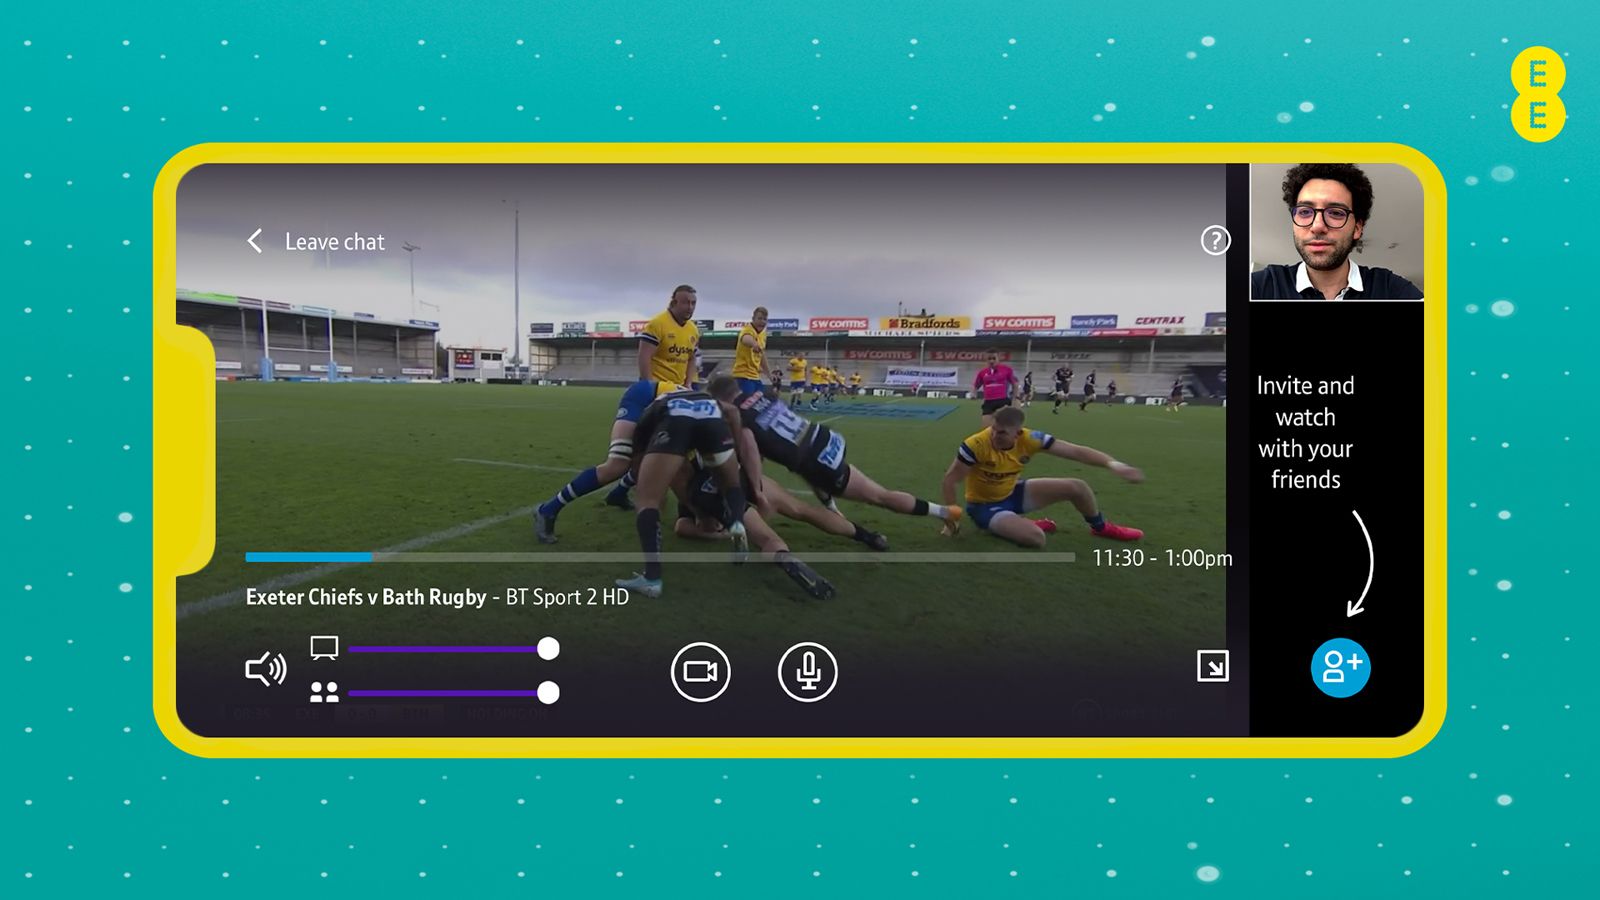 EE Match Day Experience brings 360 degree viewing photo 4